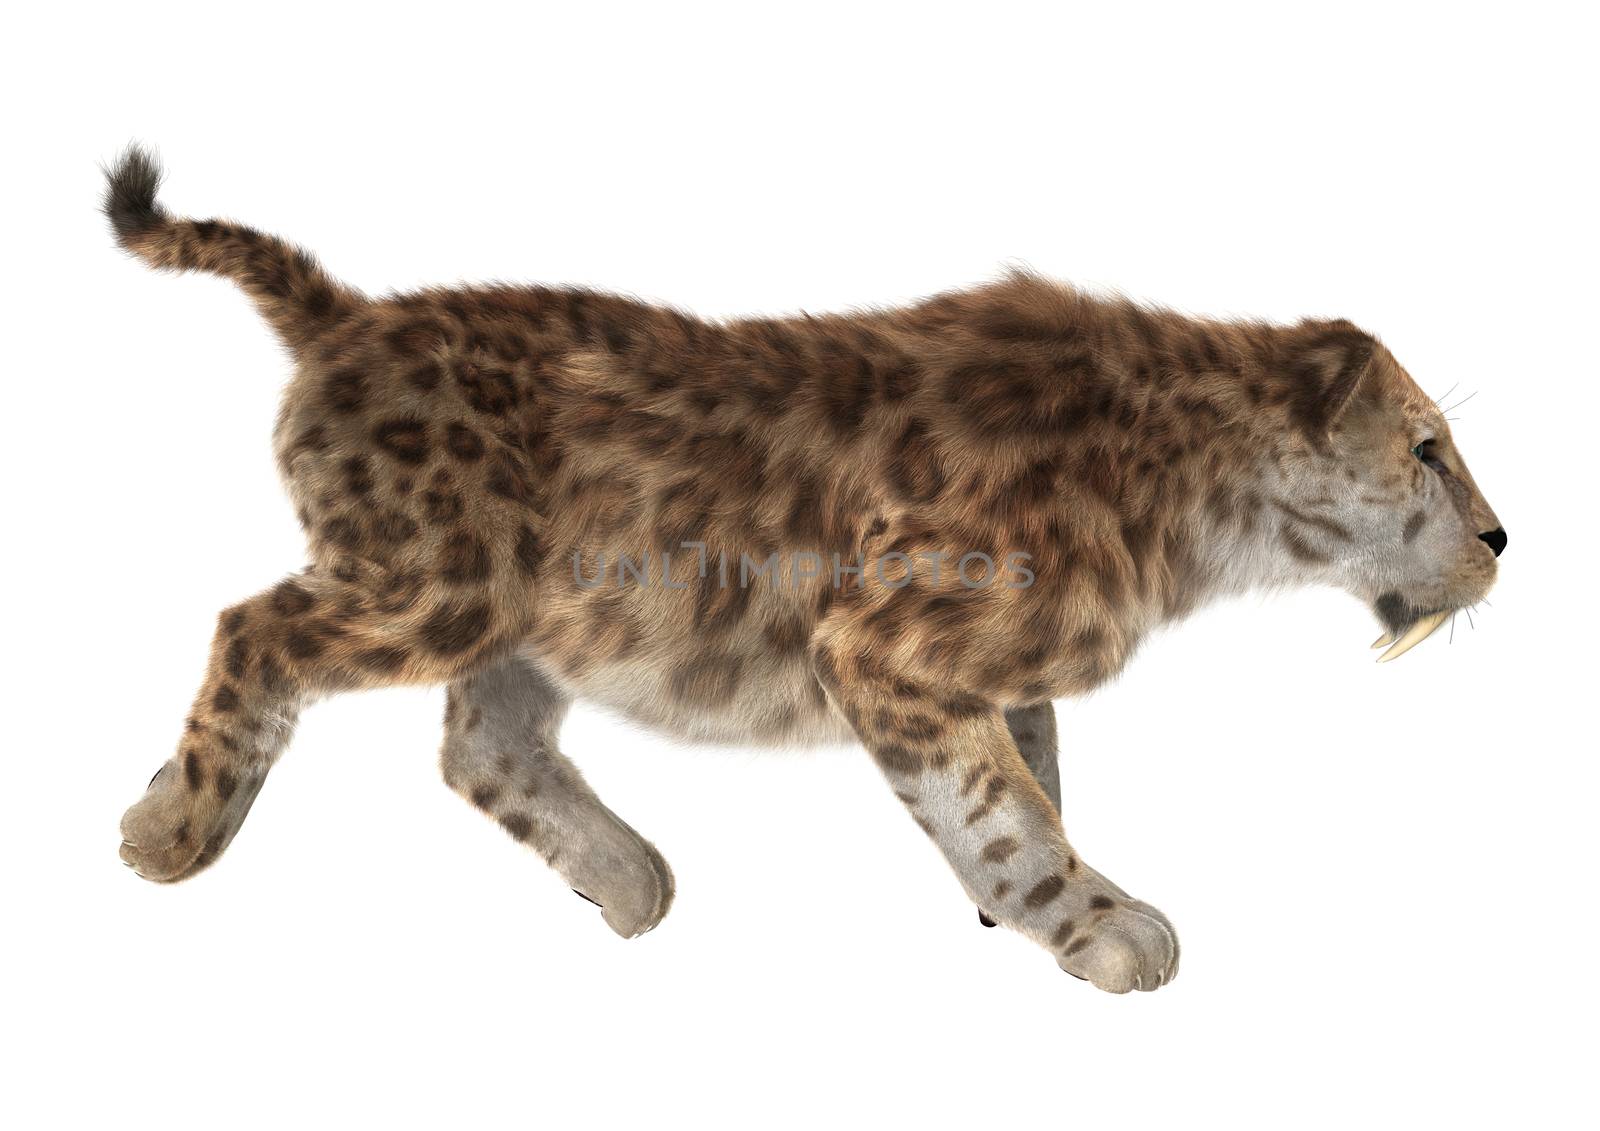 3D digital render of a big cat sabertooth isolated on white background